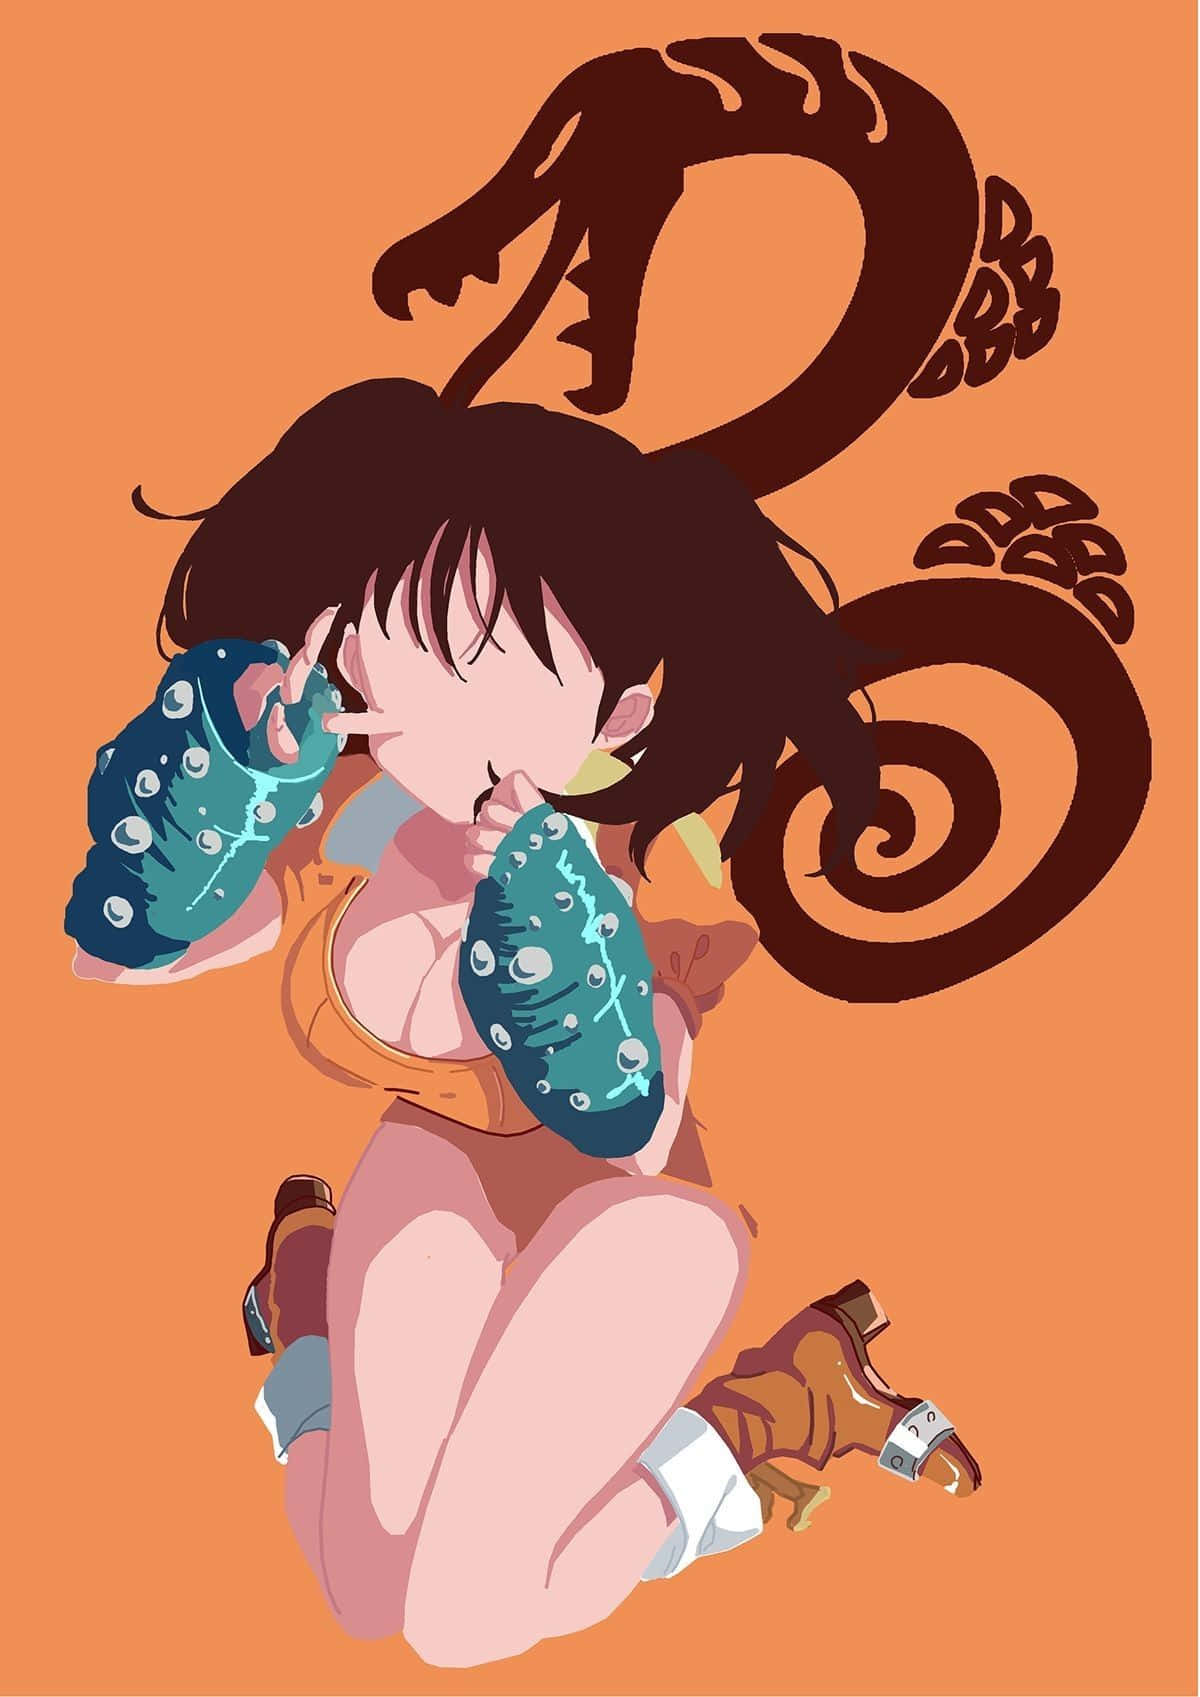 Diane, the Serpent's Sin of Envy, from Seven Deadly Sins Wallpaper